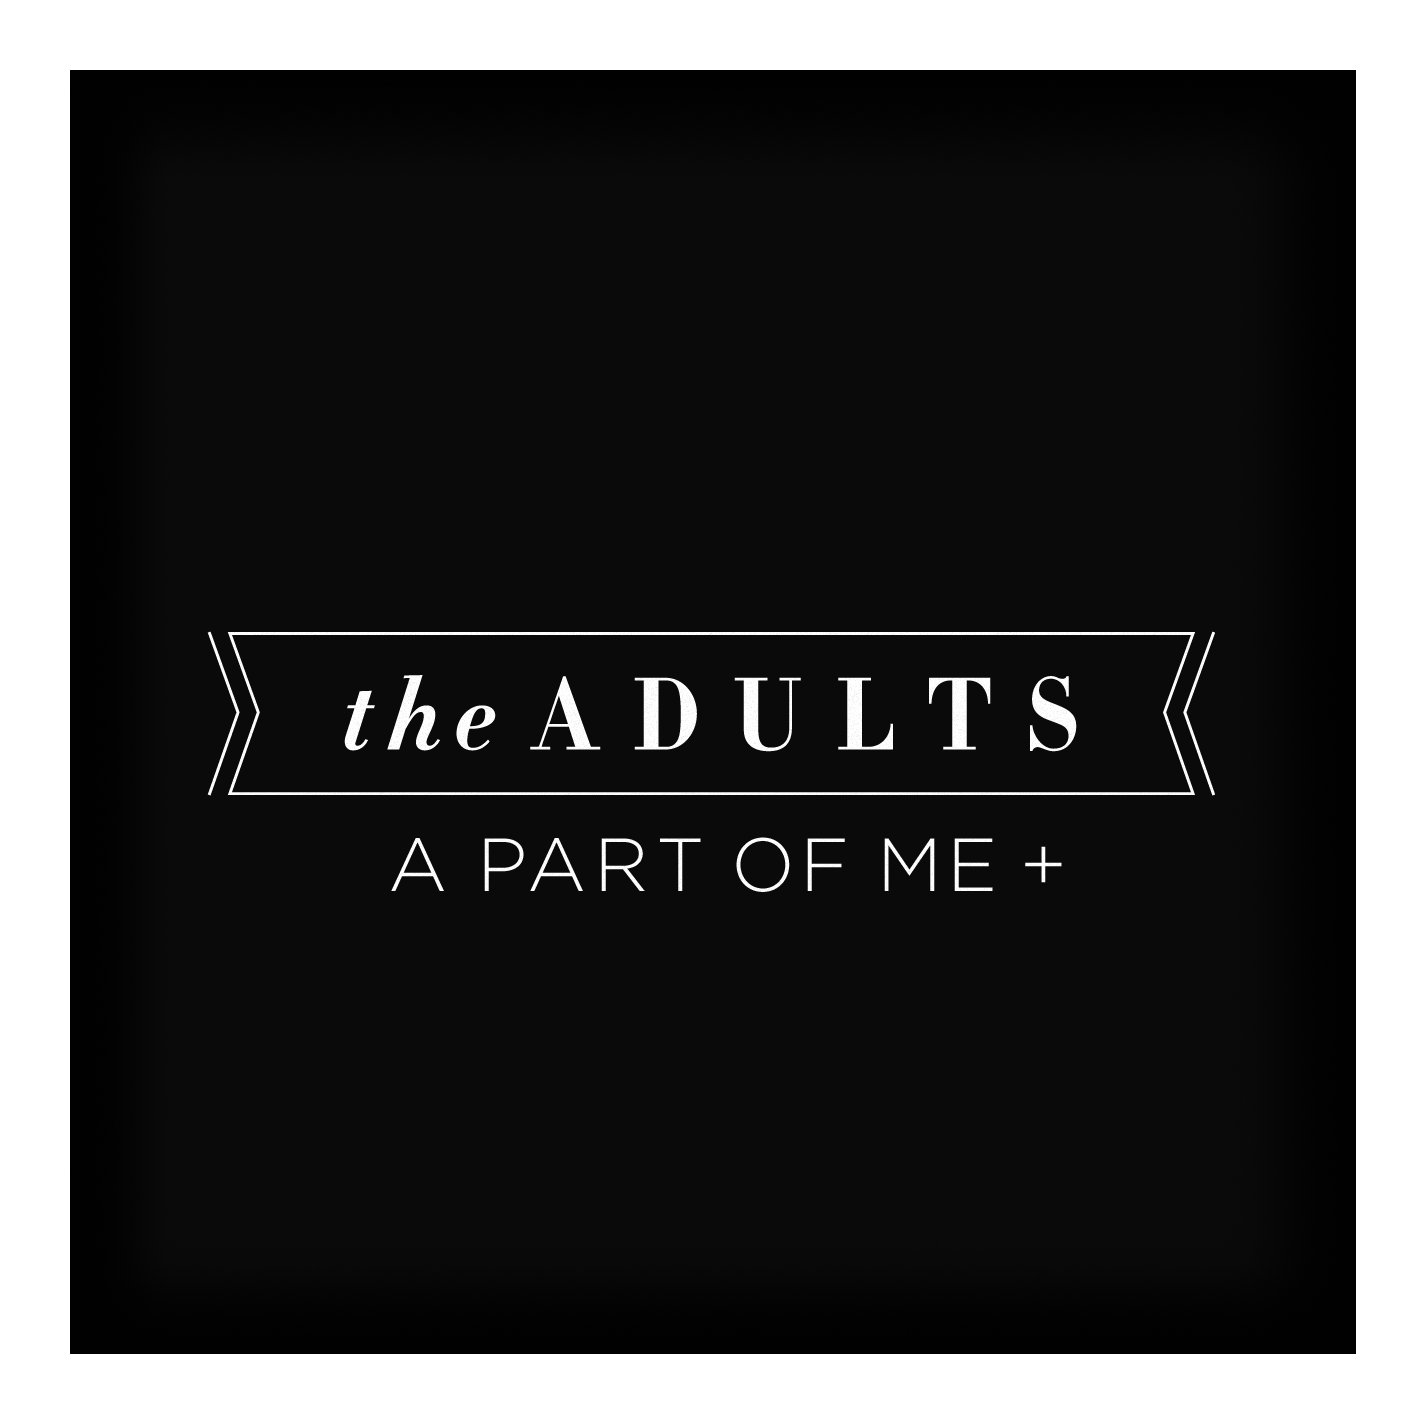 The Adults - A Part of Me Plus.jpg